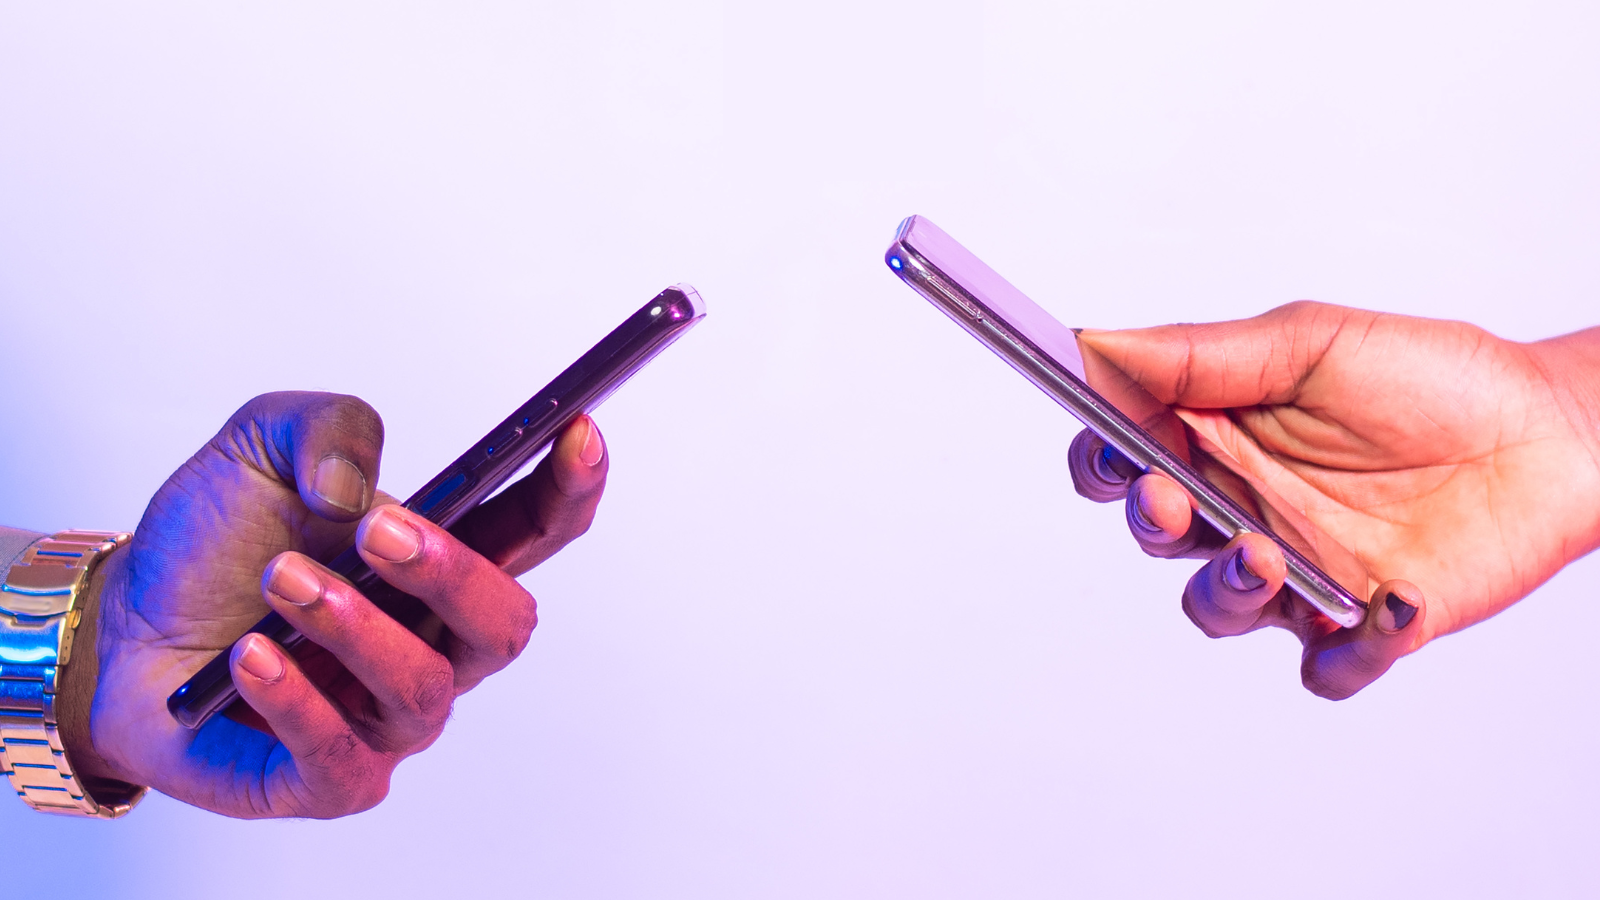 Two hands holding cell phones across from one another against a light purple backdrop. The hand on the left is wearing a gold watch. There is a purple hue to the photo.